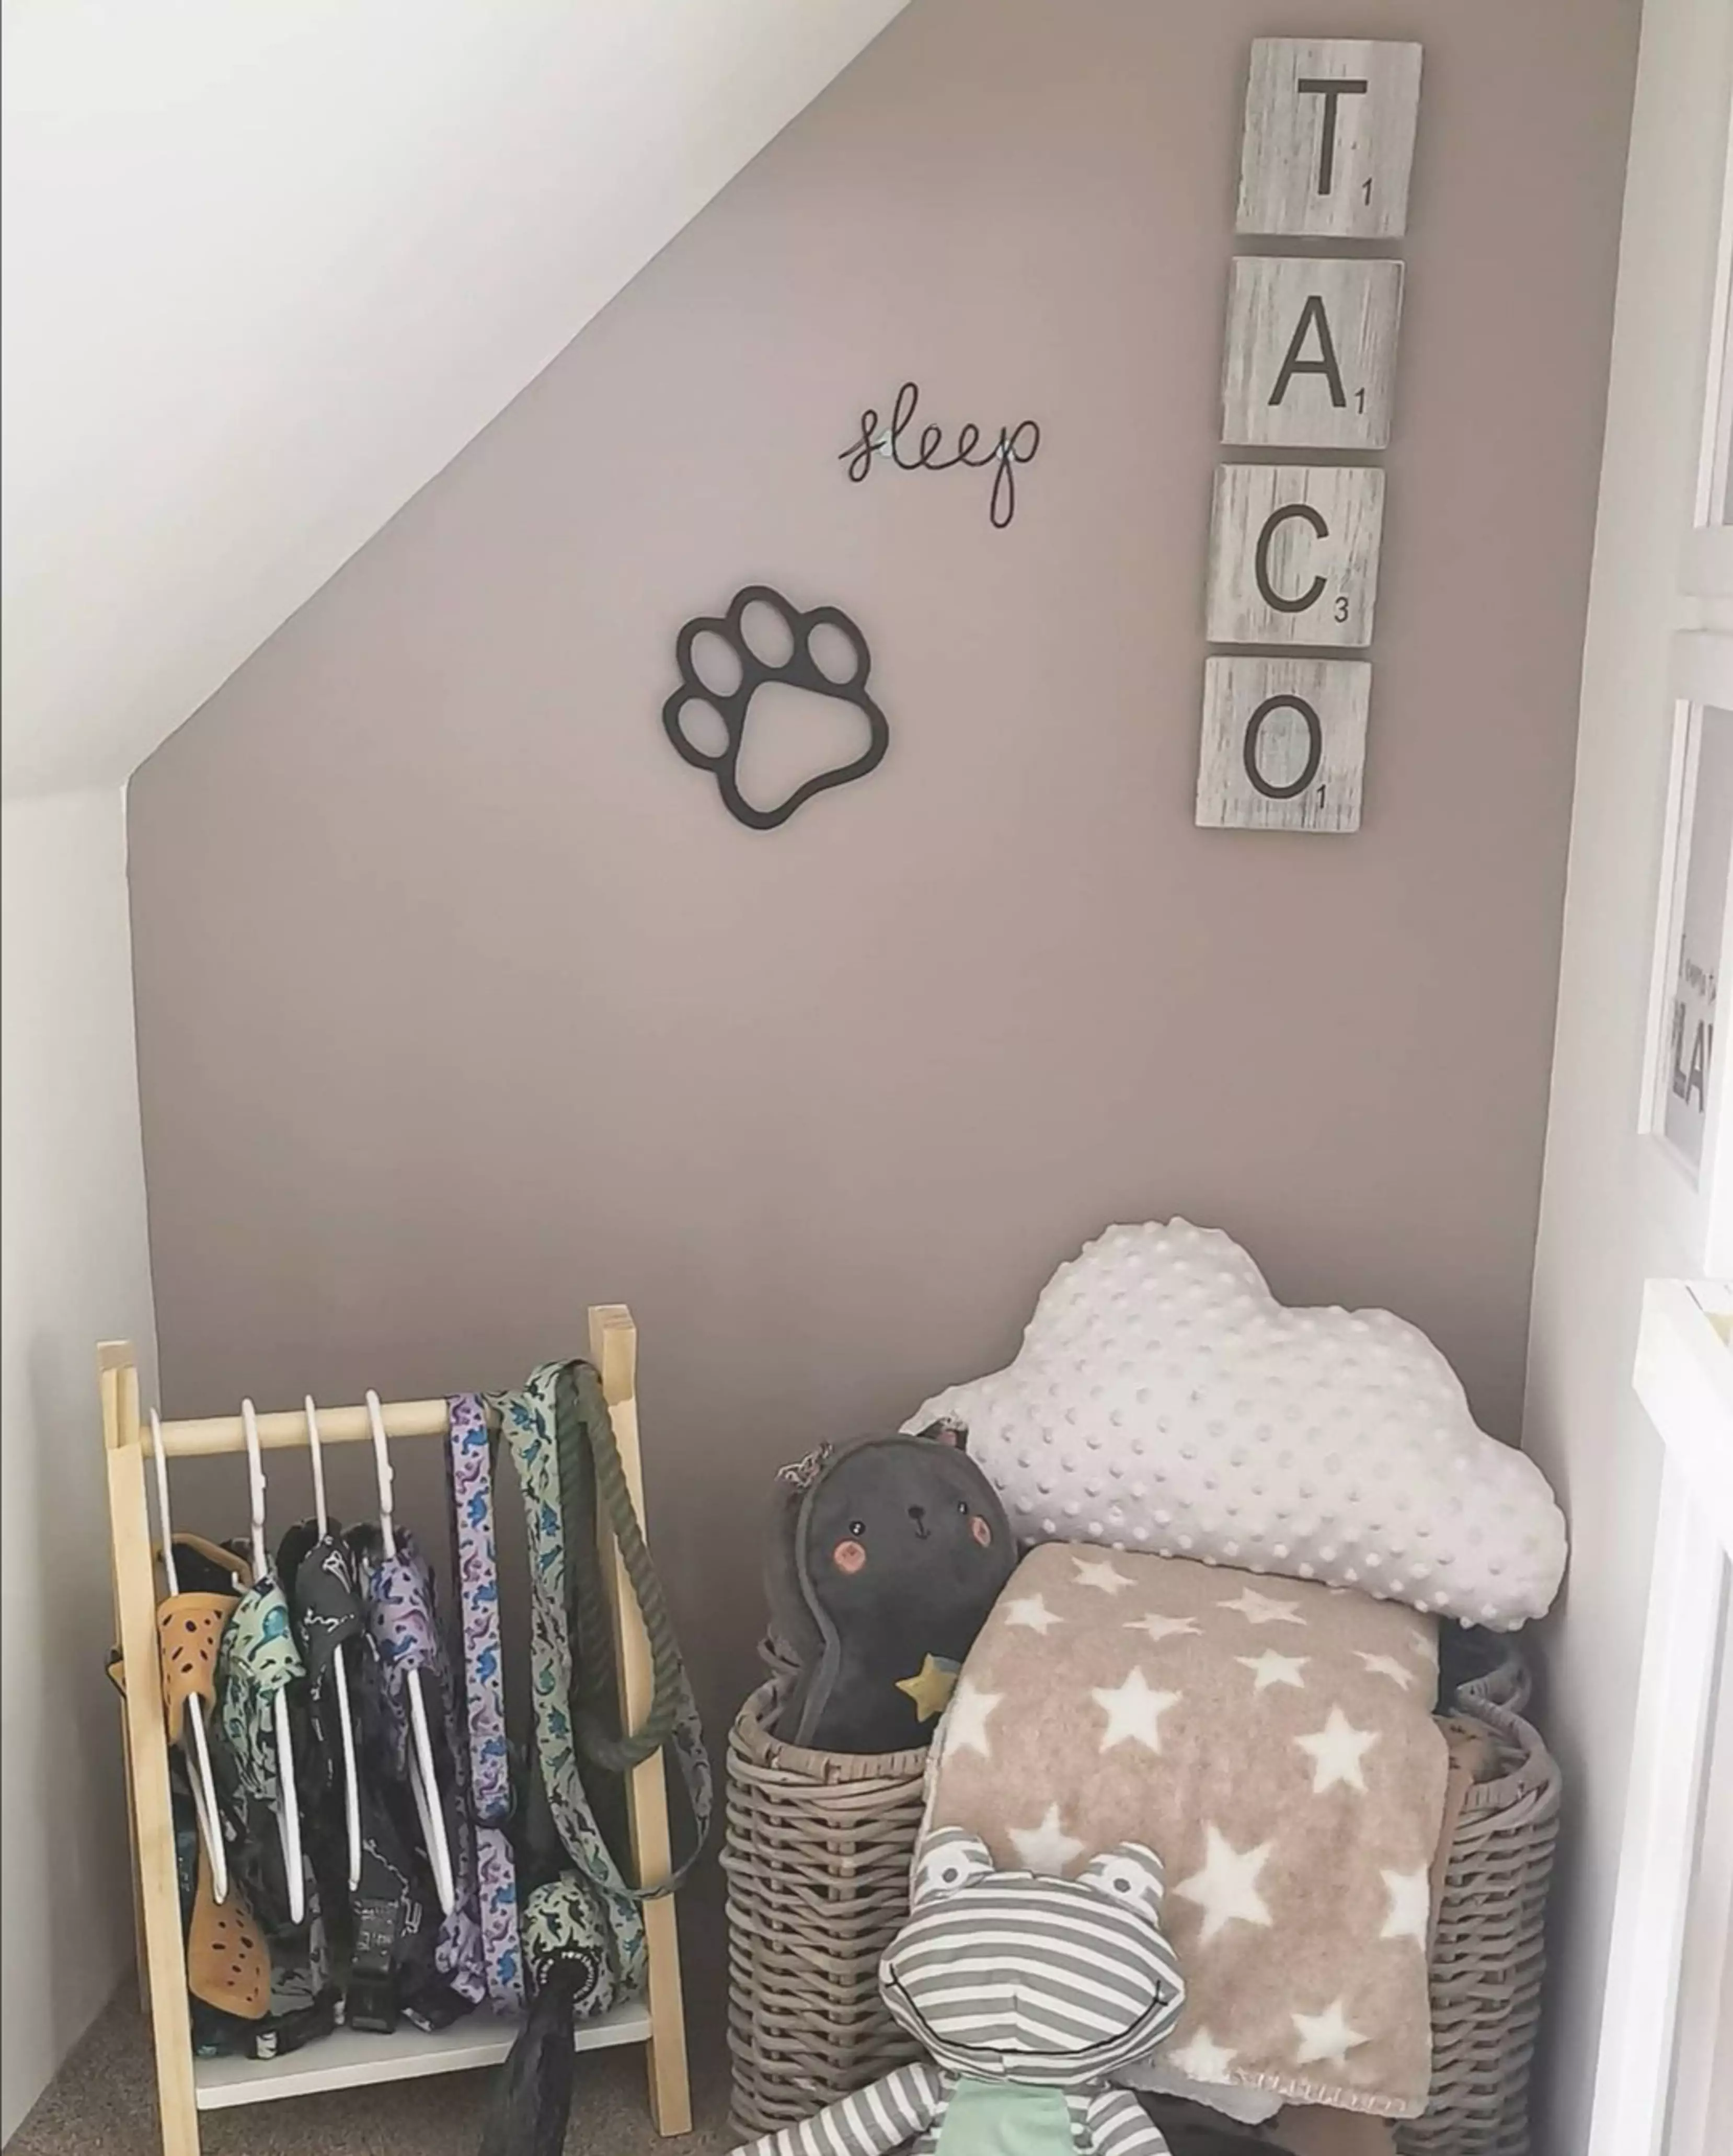 The under-stairs dog bedroom took a month to construct (